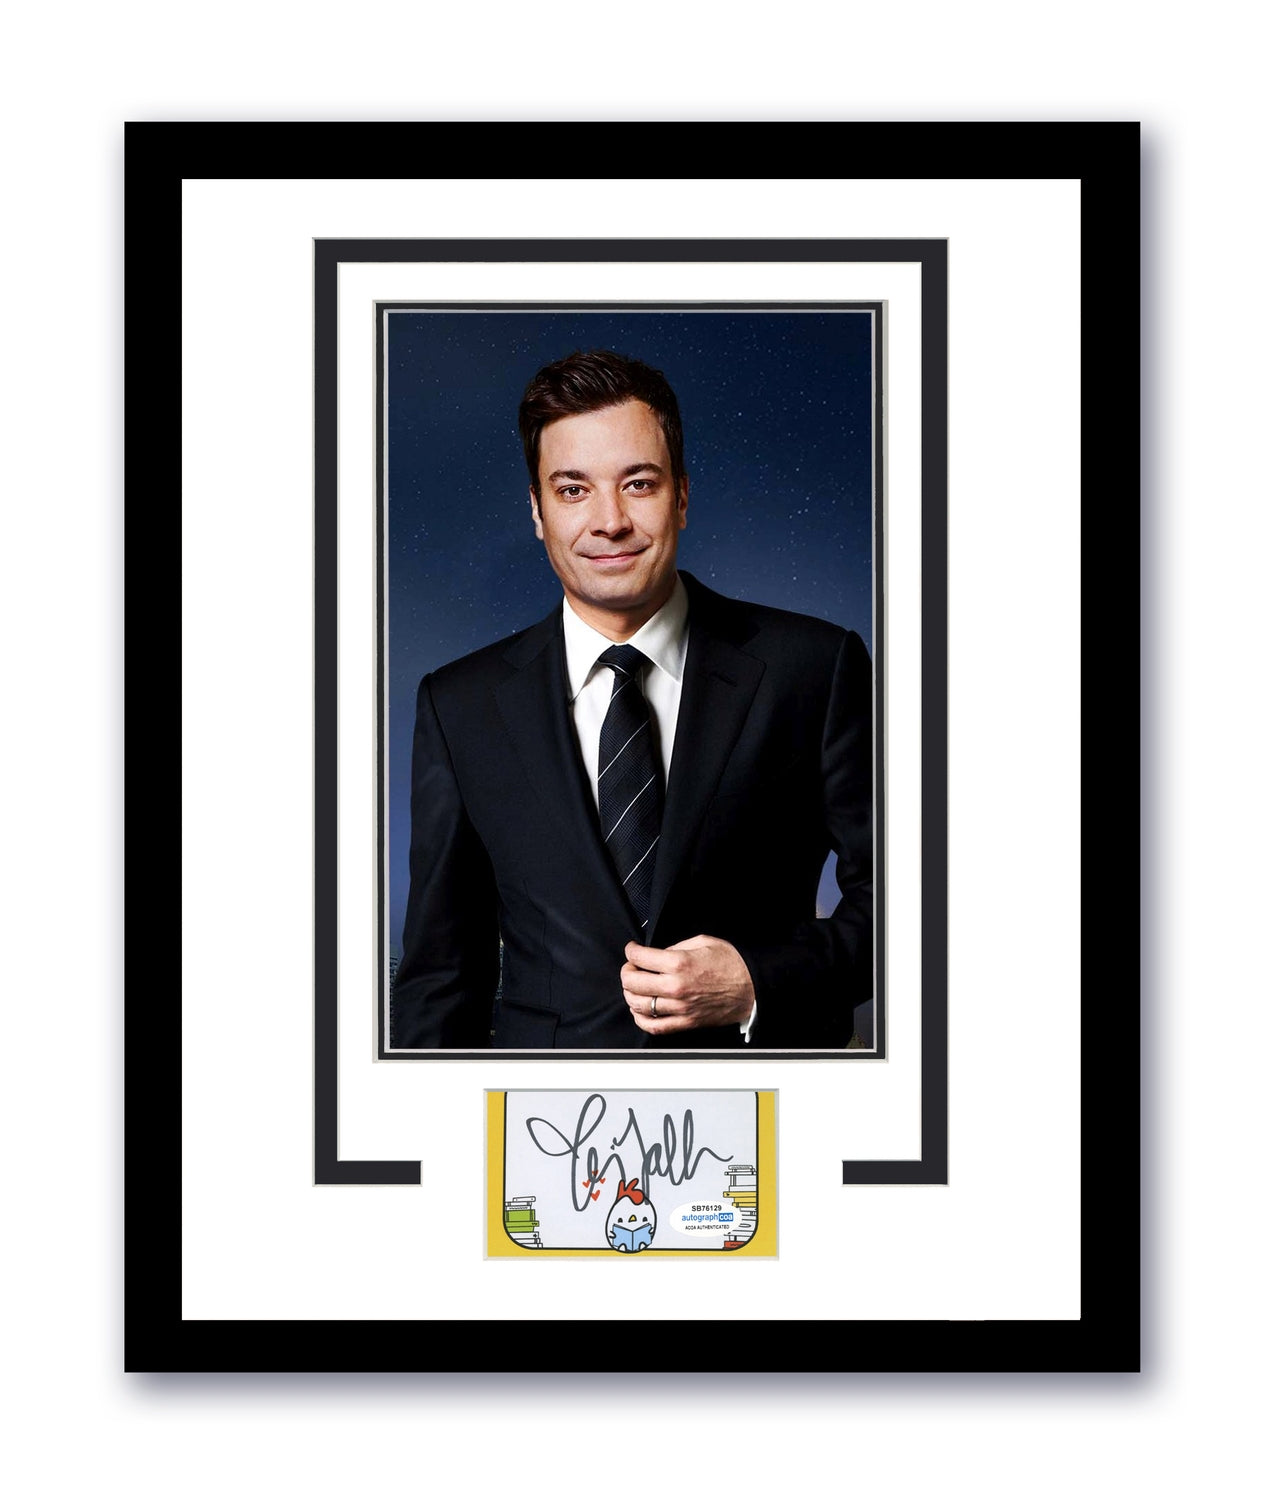 Jimmy Fallon Signed Cut 11x14 The Tonight Show Autographed Authentic ACOA 4